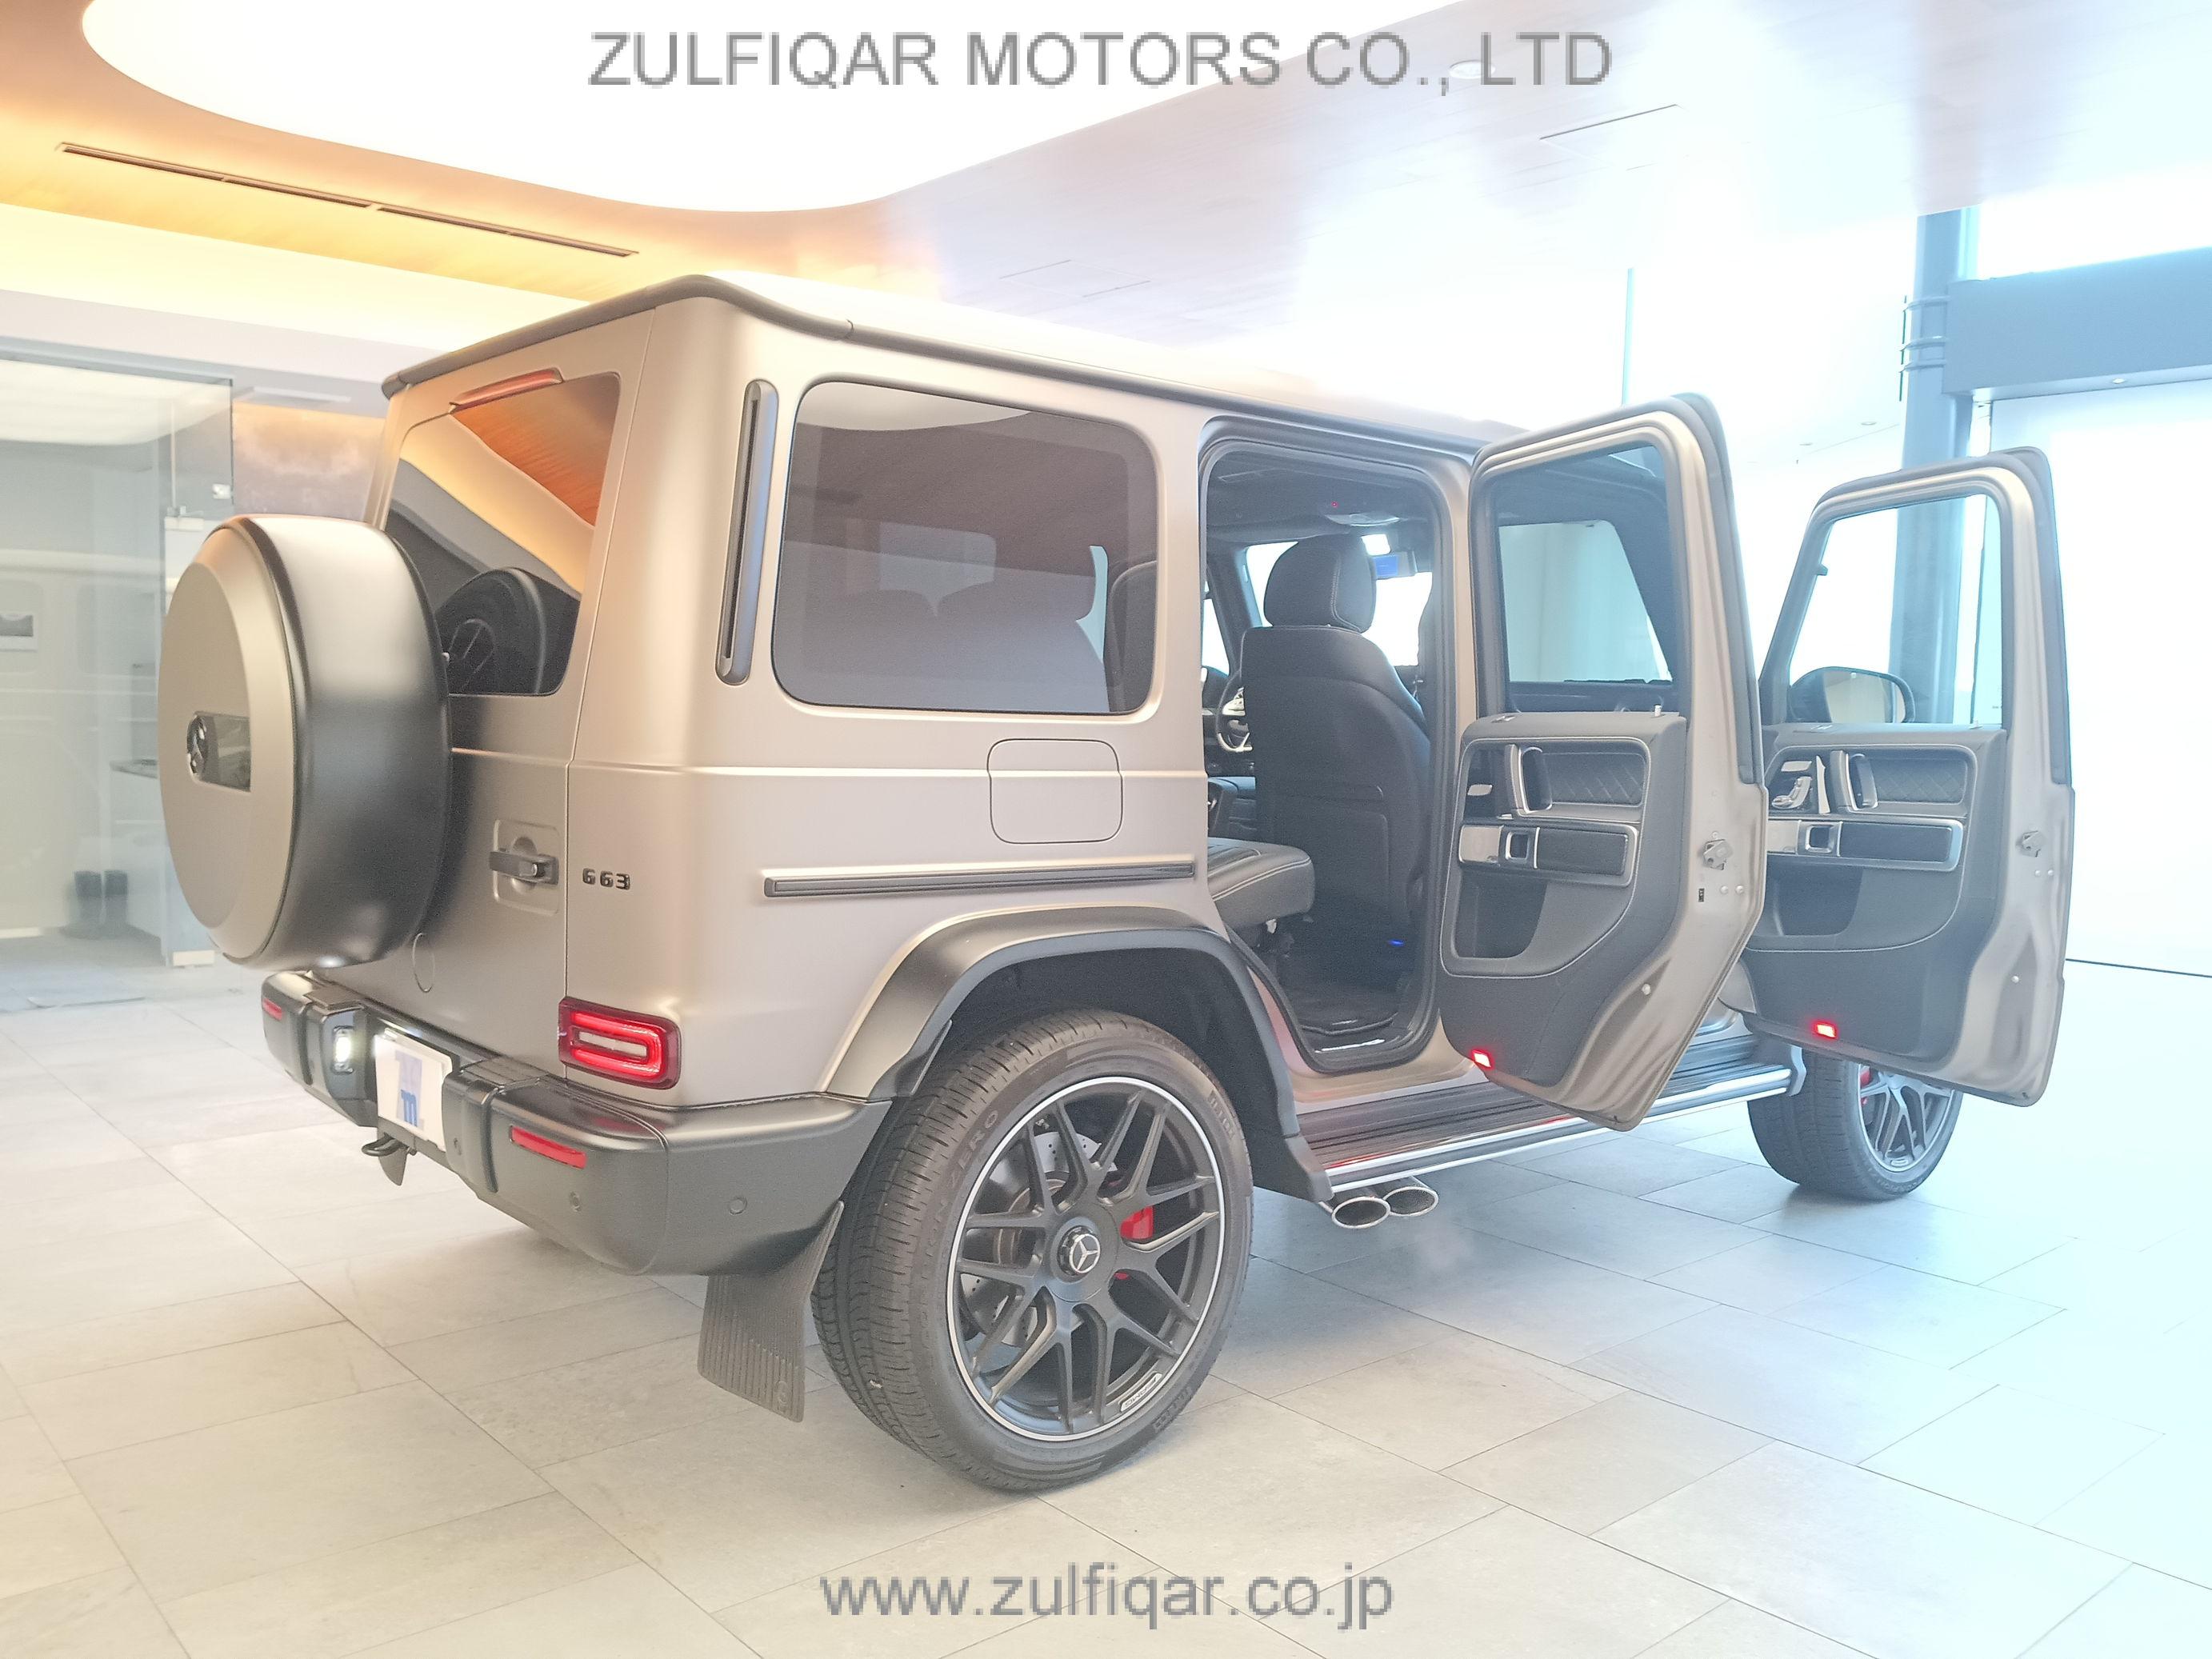 MERCEDES AMG G CLASS 2021 Image 37